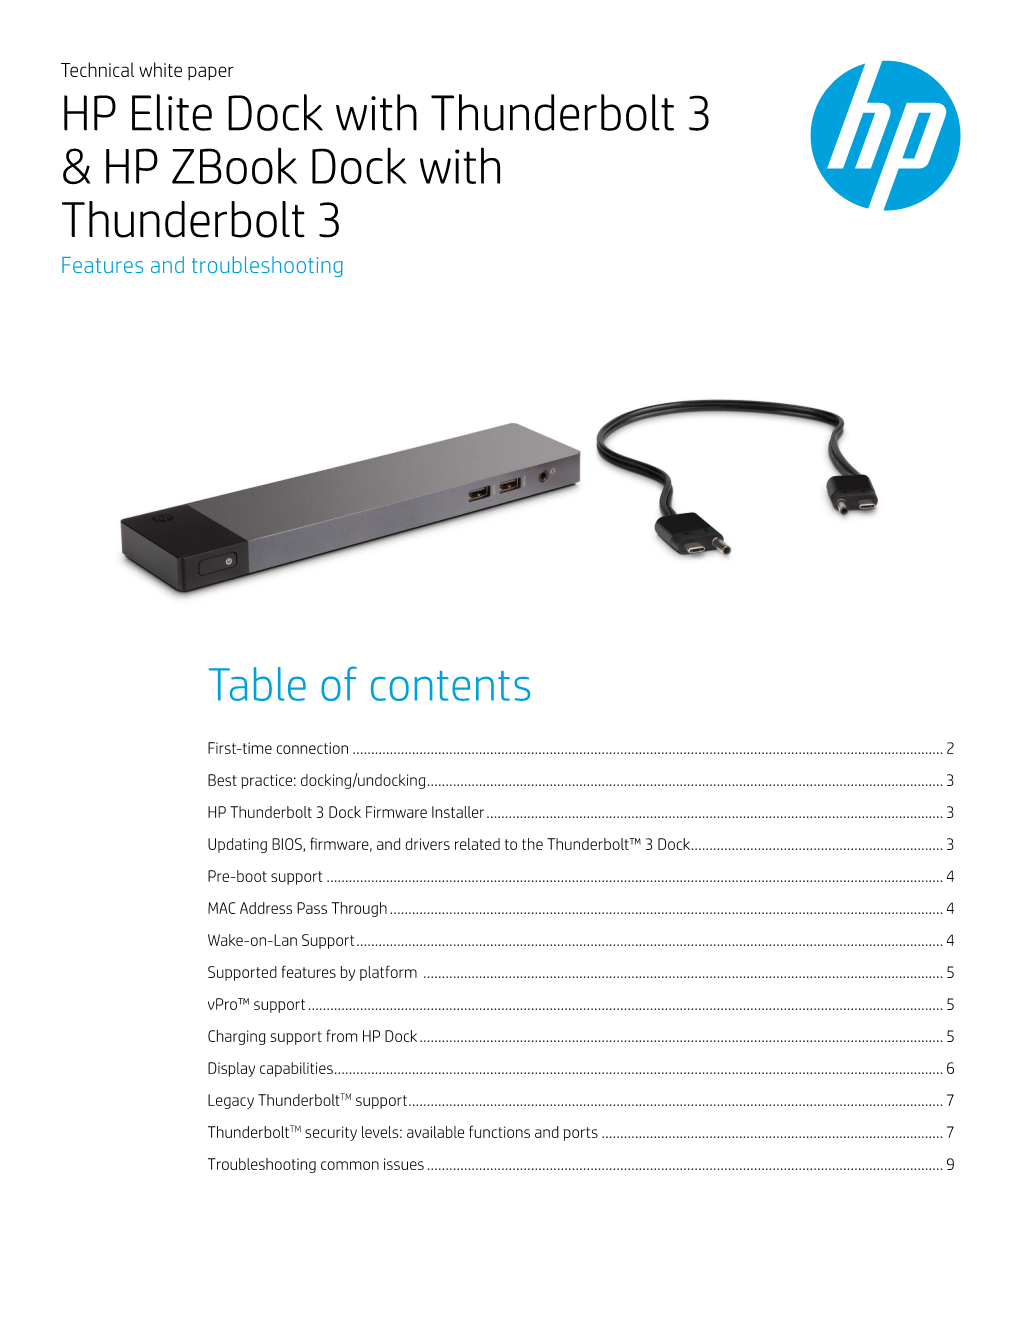 HP Elite Dock with Thunderbolt 3 & HP Zbook Dock with Thunderbolt 3